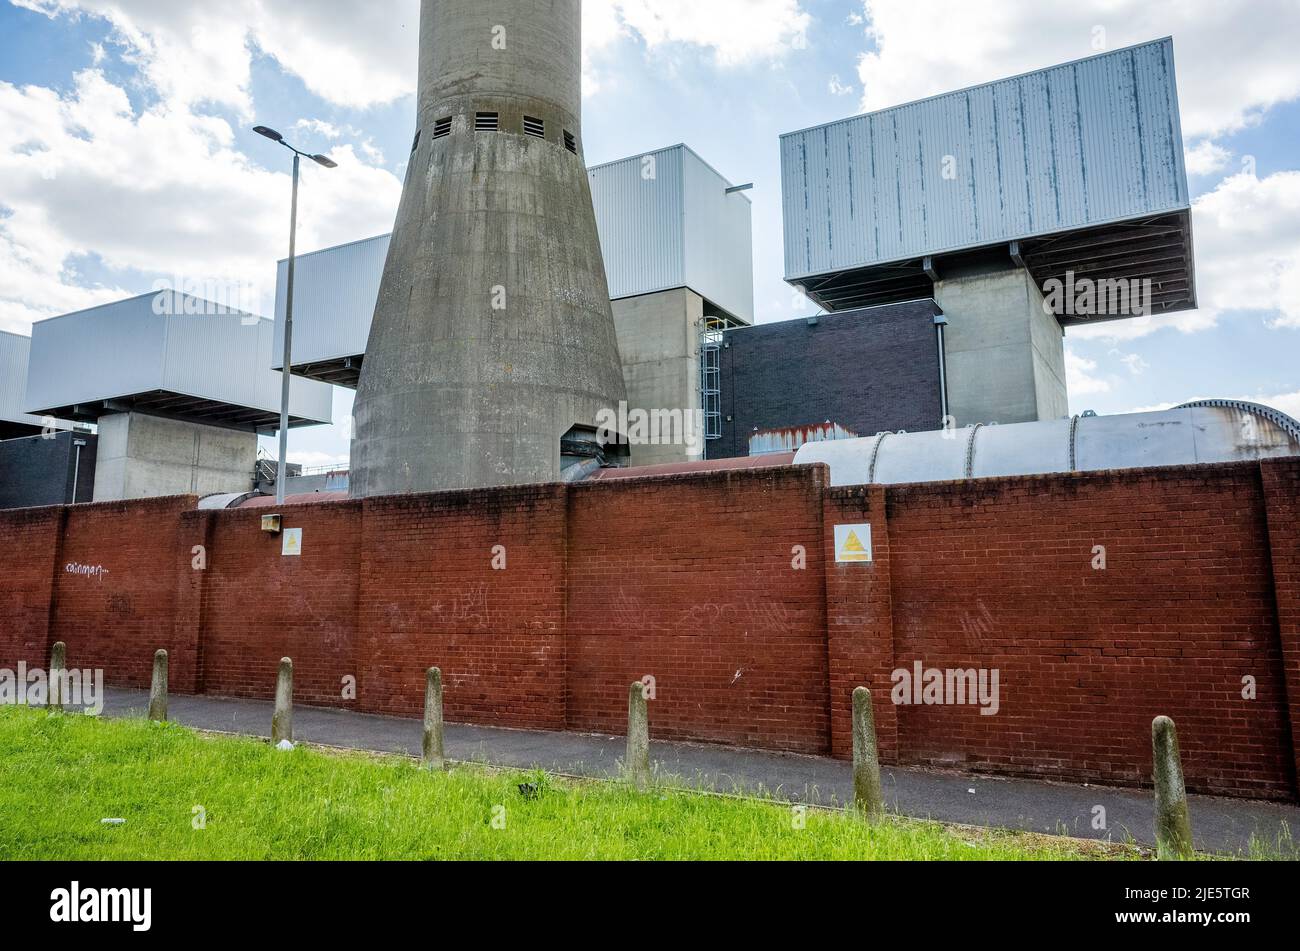 Taylors Lane Power Station owned by Uniper, situated in Willesden, north-west London. Stock Photo